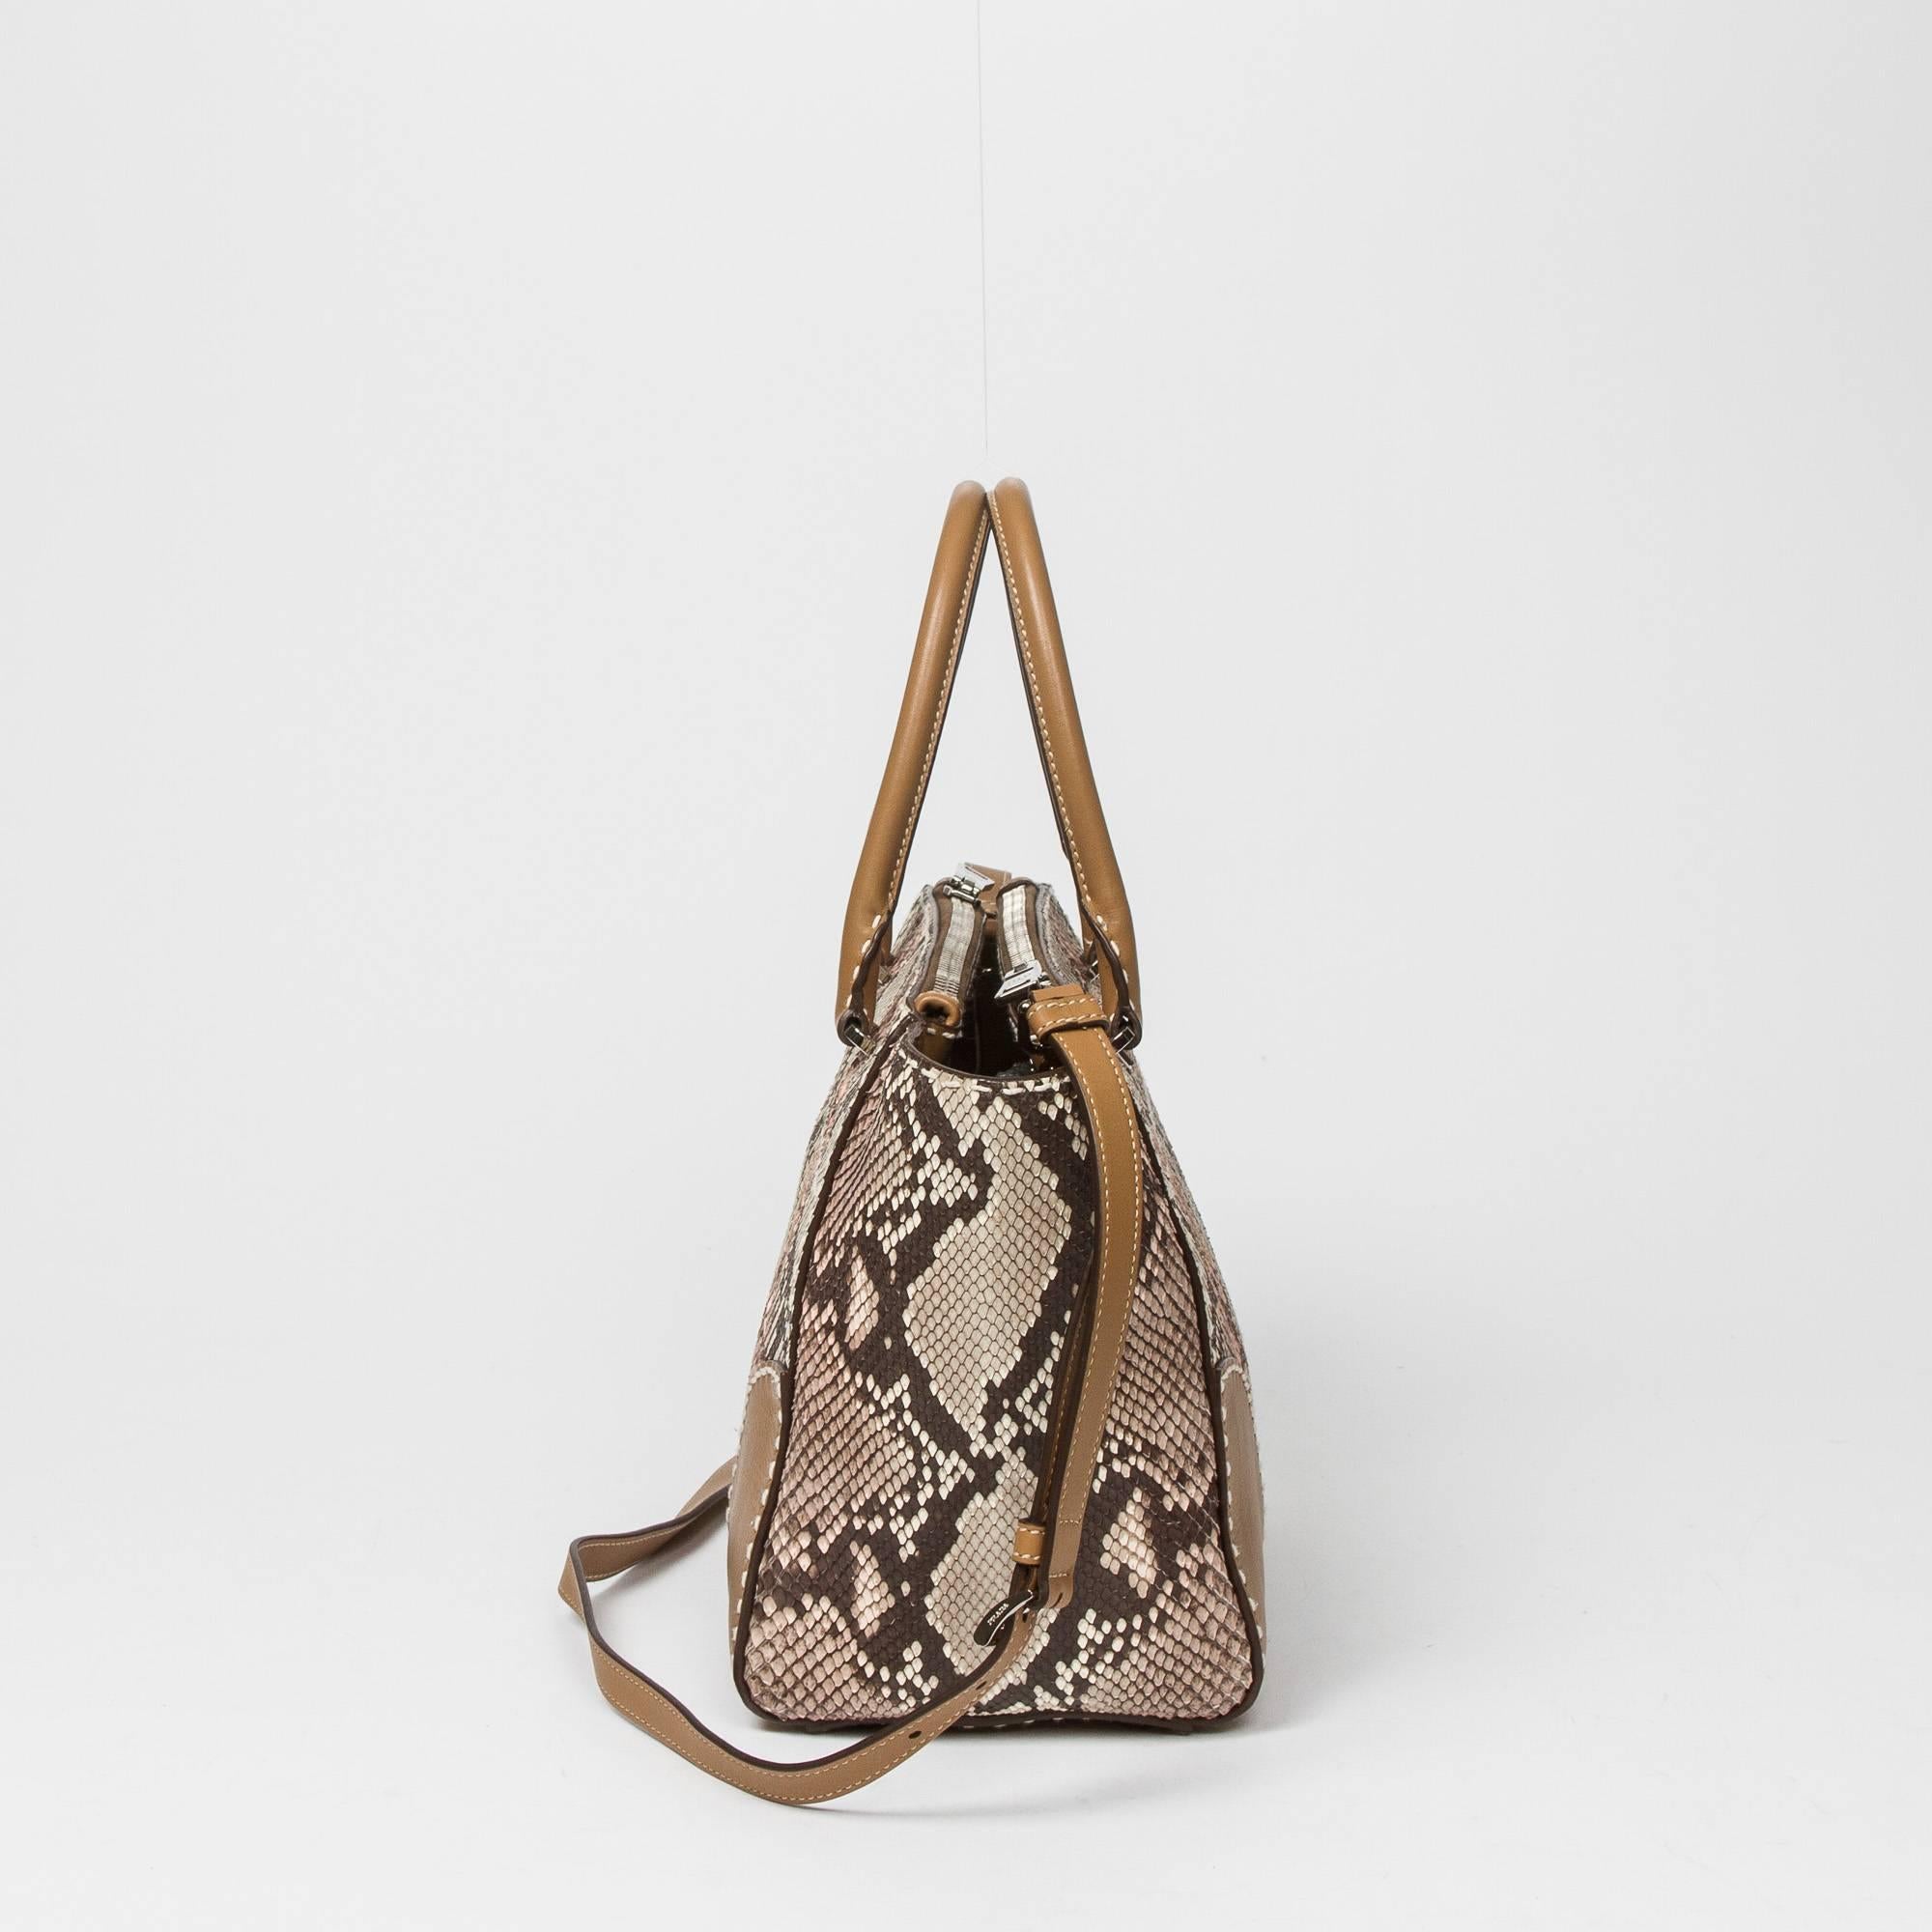 Women's Prada Tote in Beige/Ivory/Brown python leather